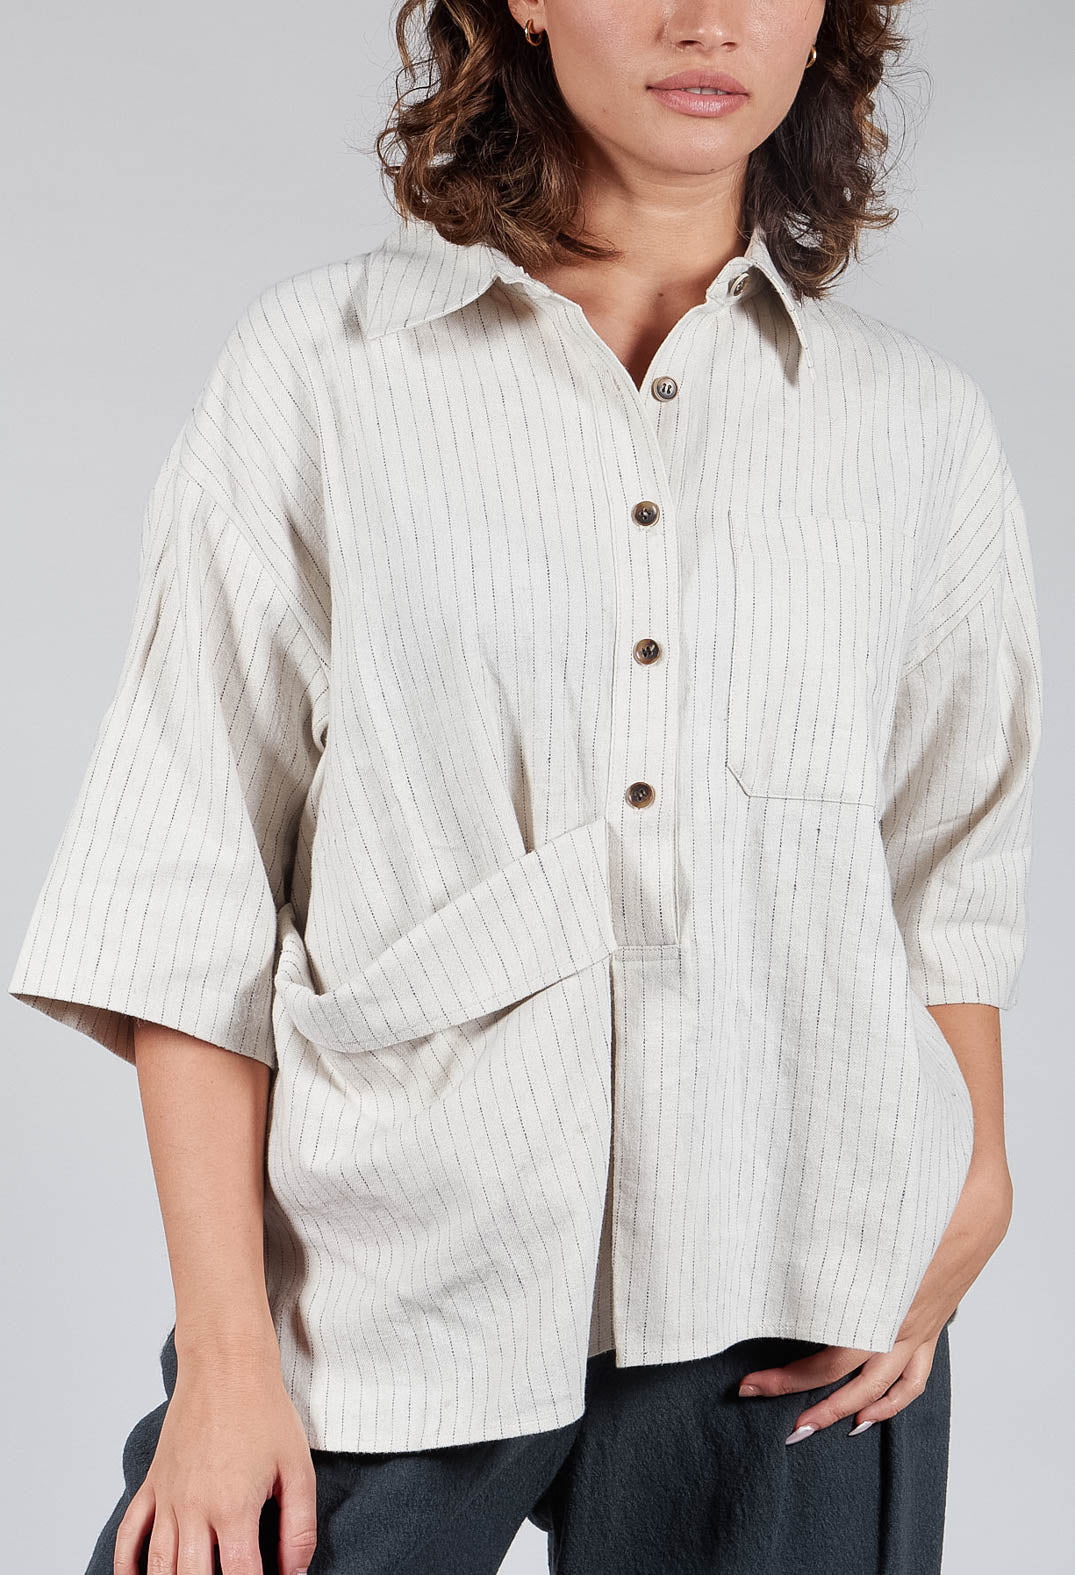 3/4 Sleeved Shirt with Statement Pocket in Ivory Stripe